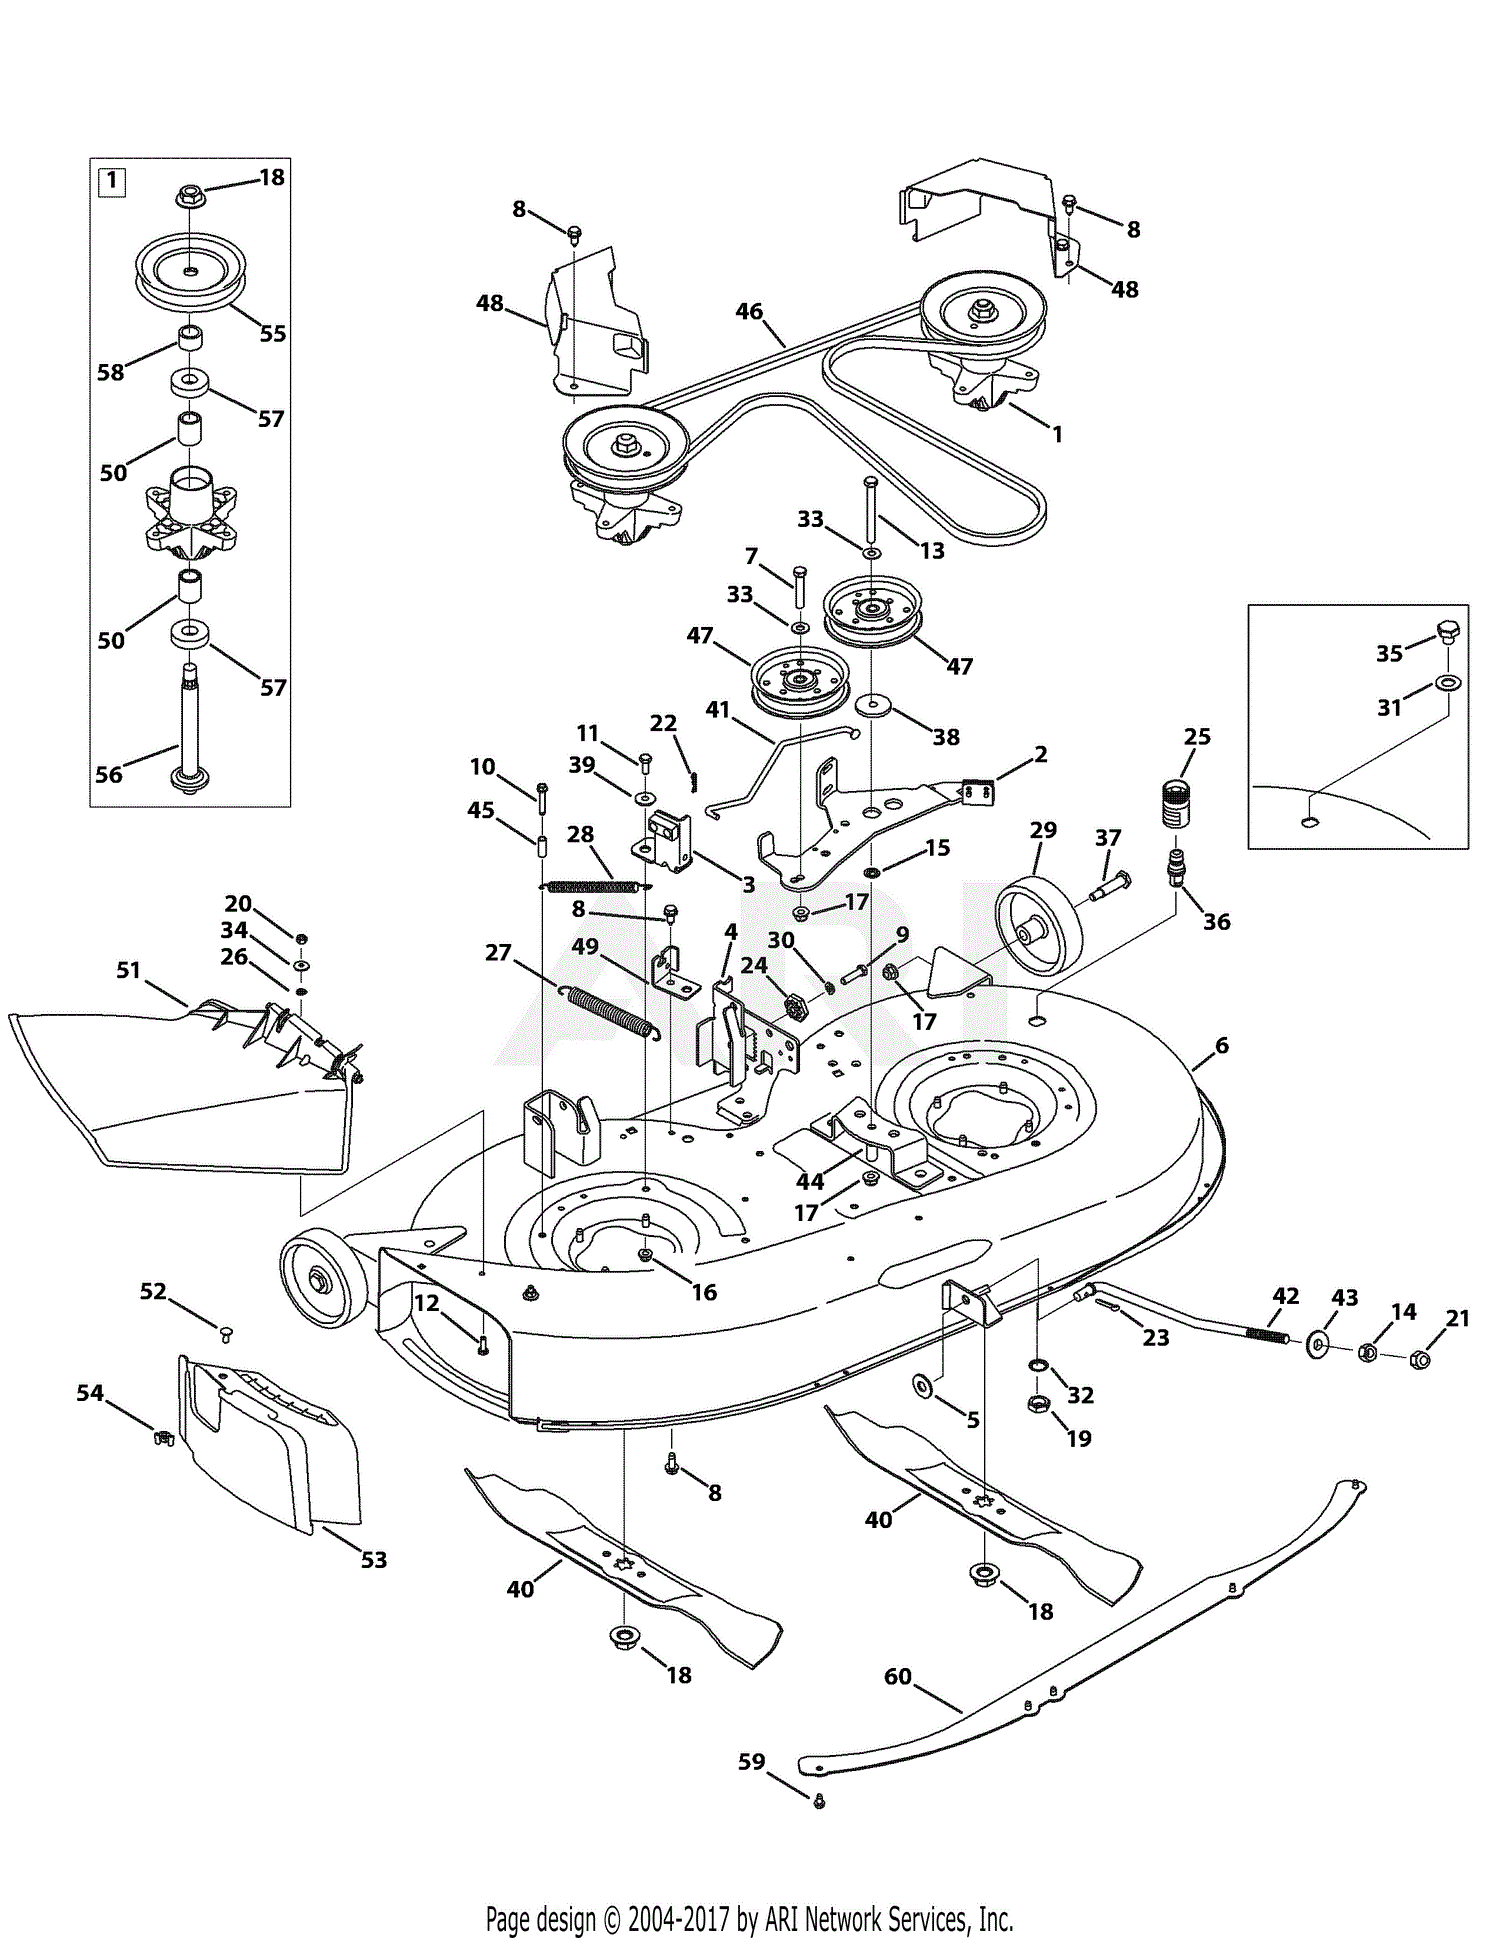 Wiring Diagram For Husky Lawn Mower